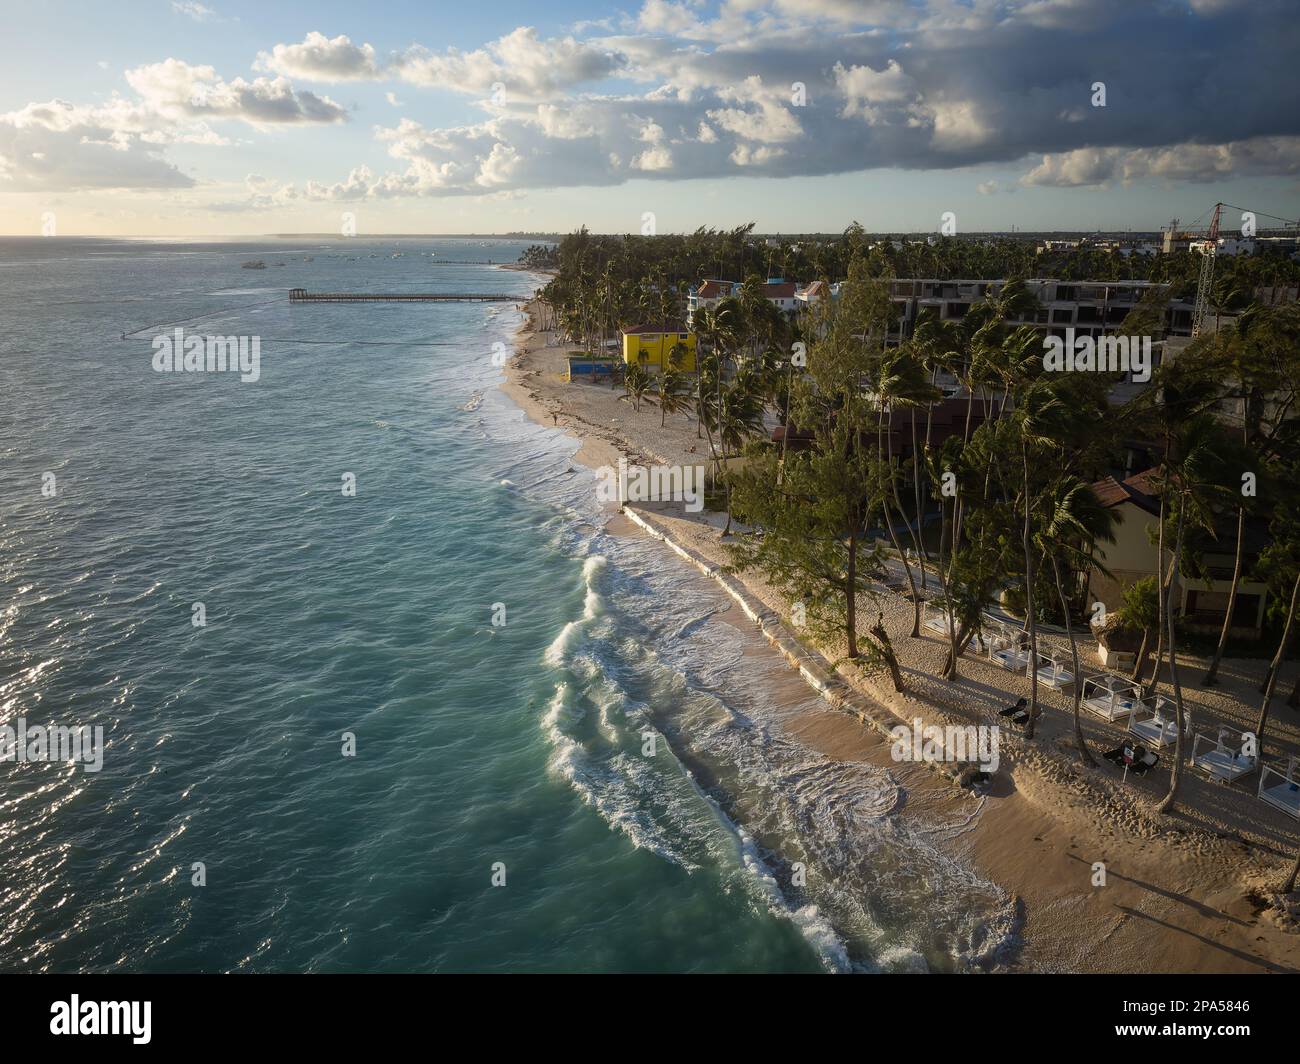 Shooting from a drone. A cozy resort town on the seashore. Clean sandy beach, tropical plants, turquoise sea water and white foamy waves. Cloudy sky. Stock Photo